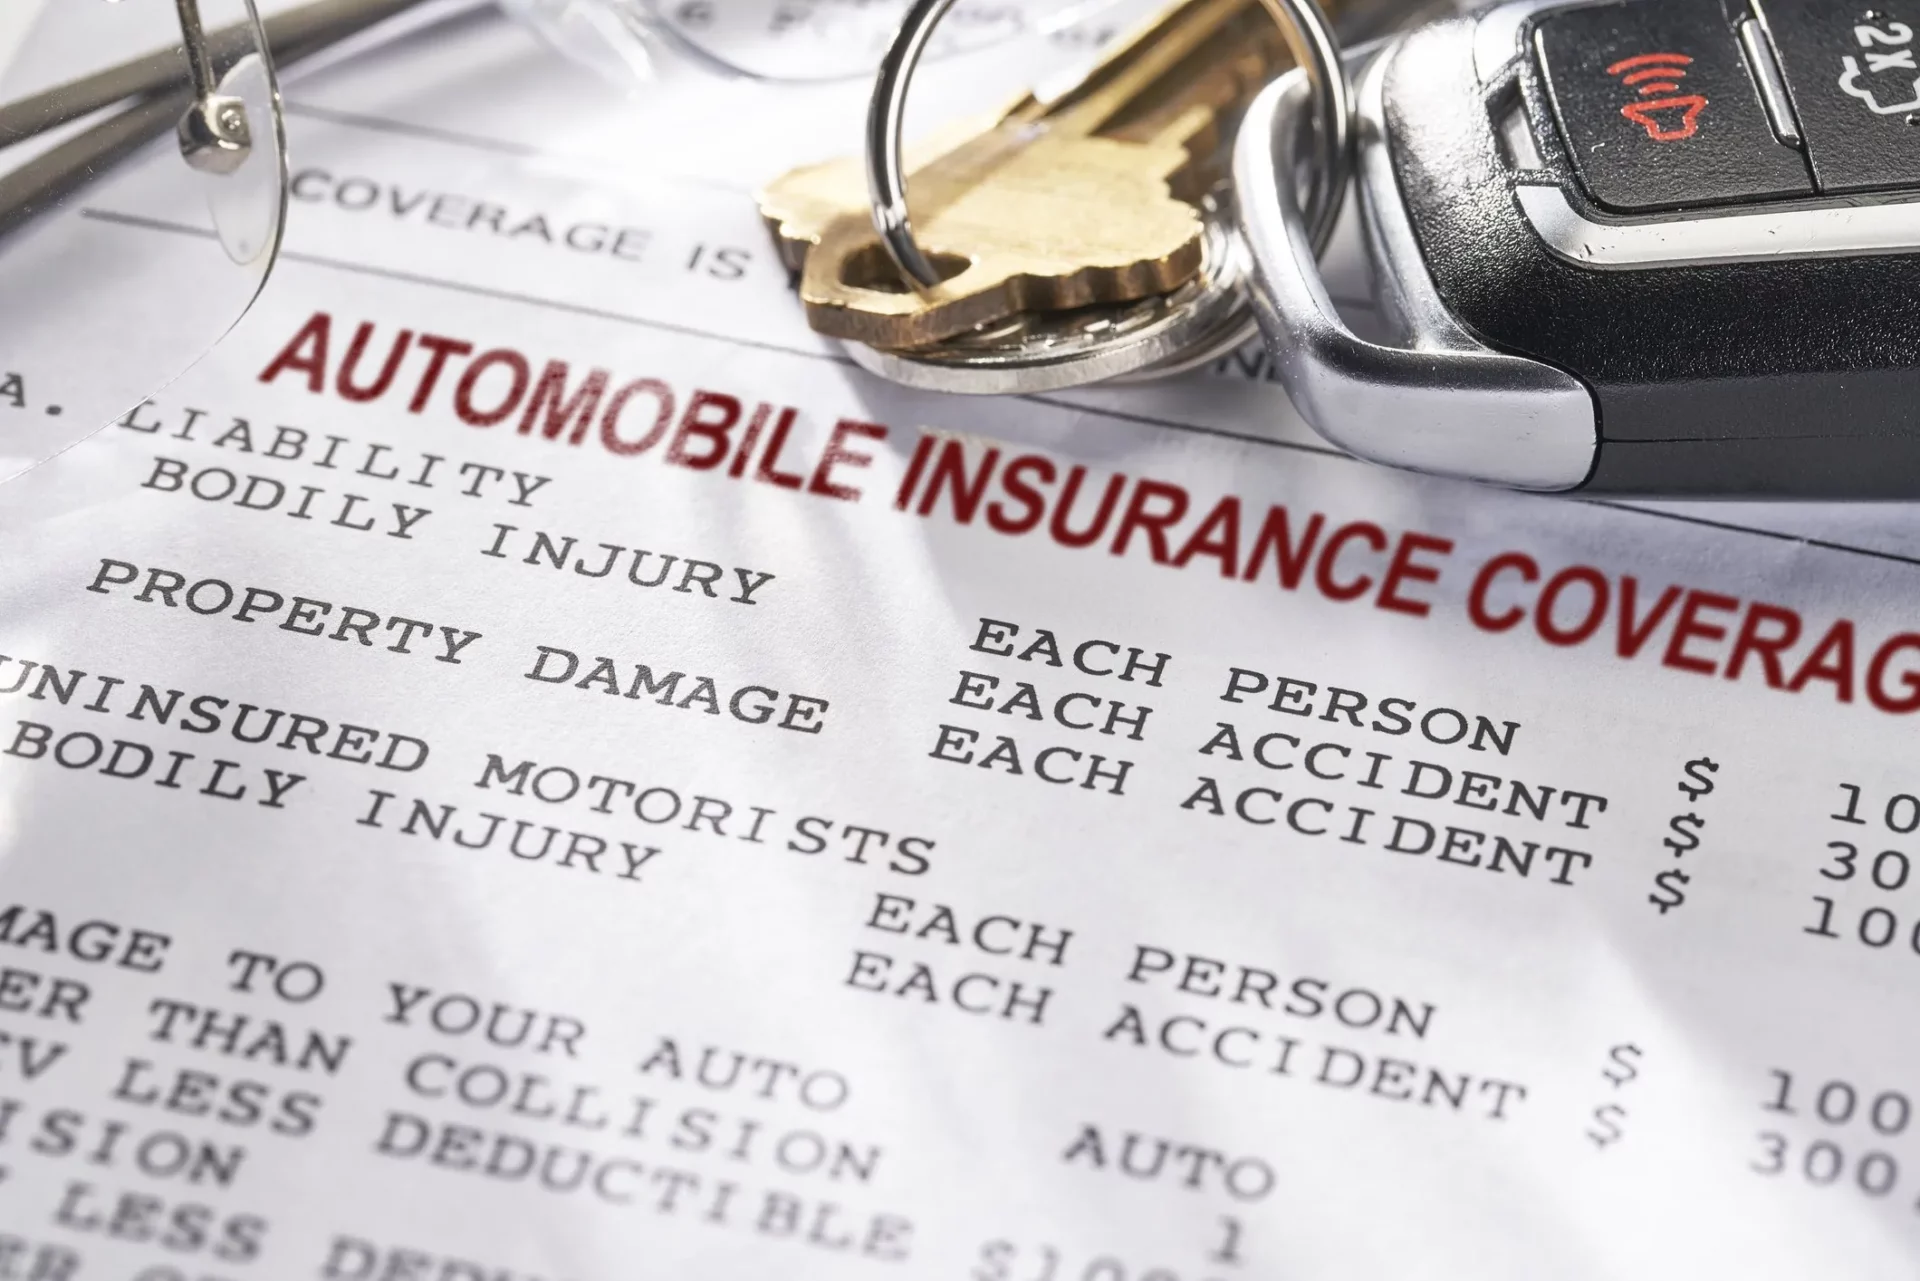 Insurance coverage document with car keys on it